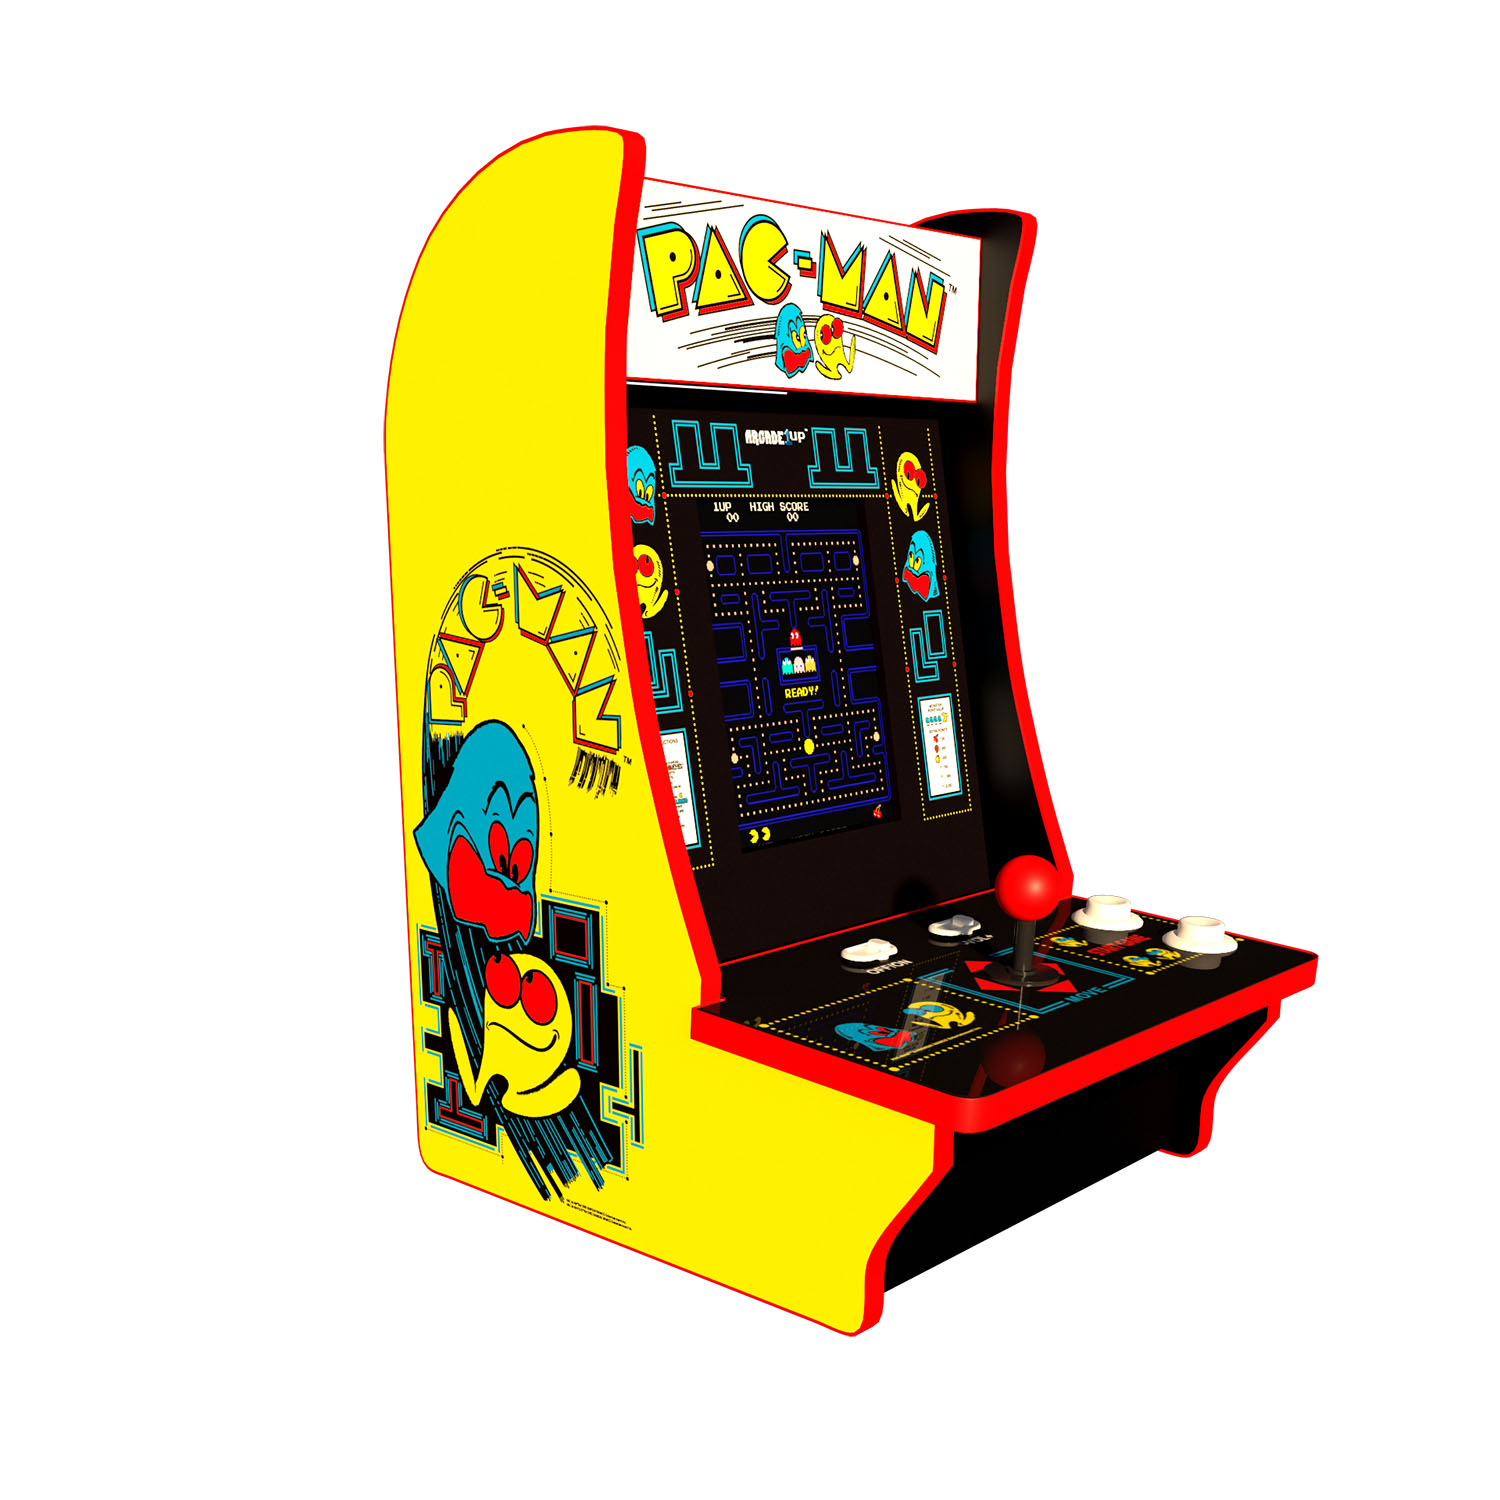 Pac-Man and Pac & Pal Counter Arcade Machine, Arcade1UP - image 1 of 10